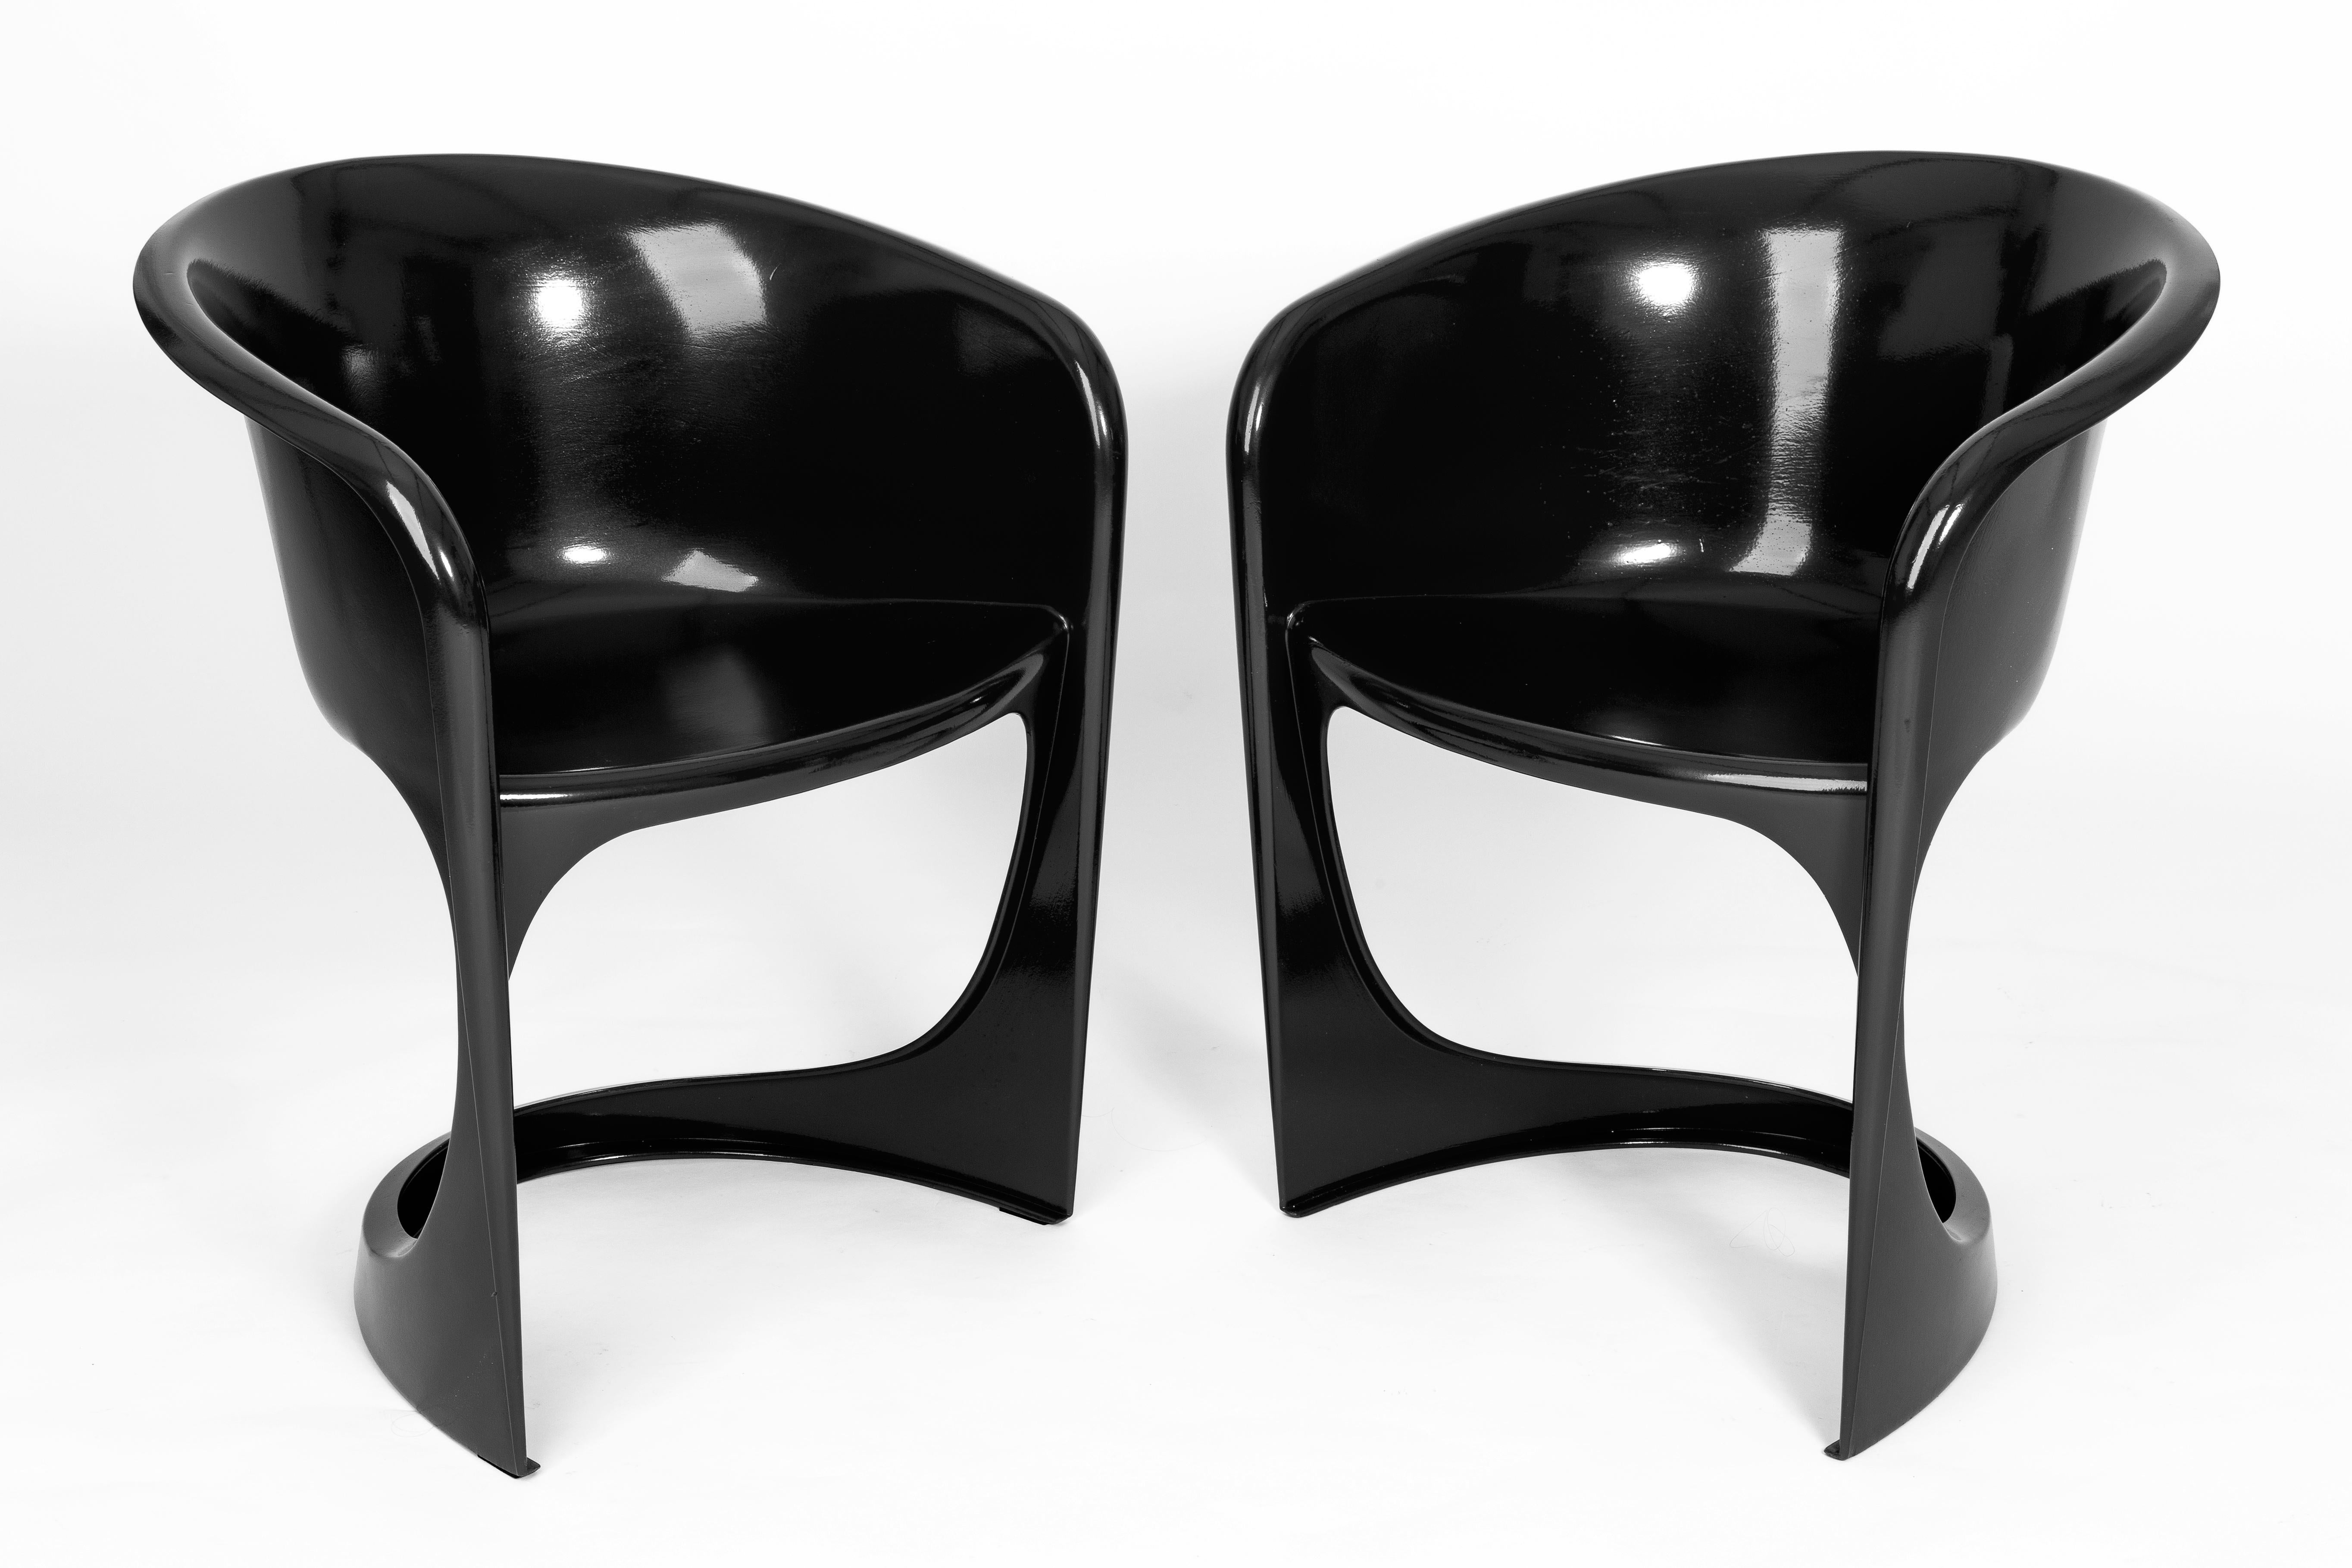 Polish Set of Four Black Glossy Cado Chairs, Steen Østergaard, 1974 For Sale